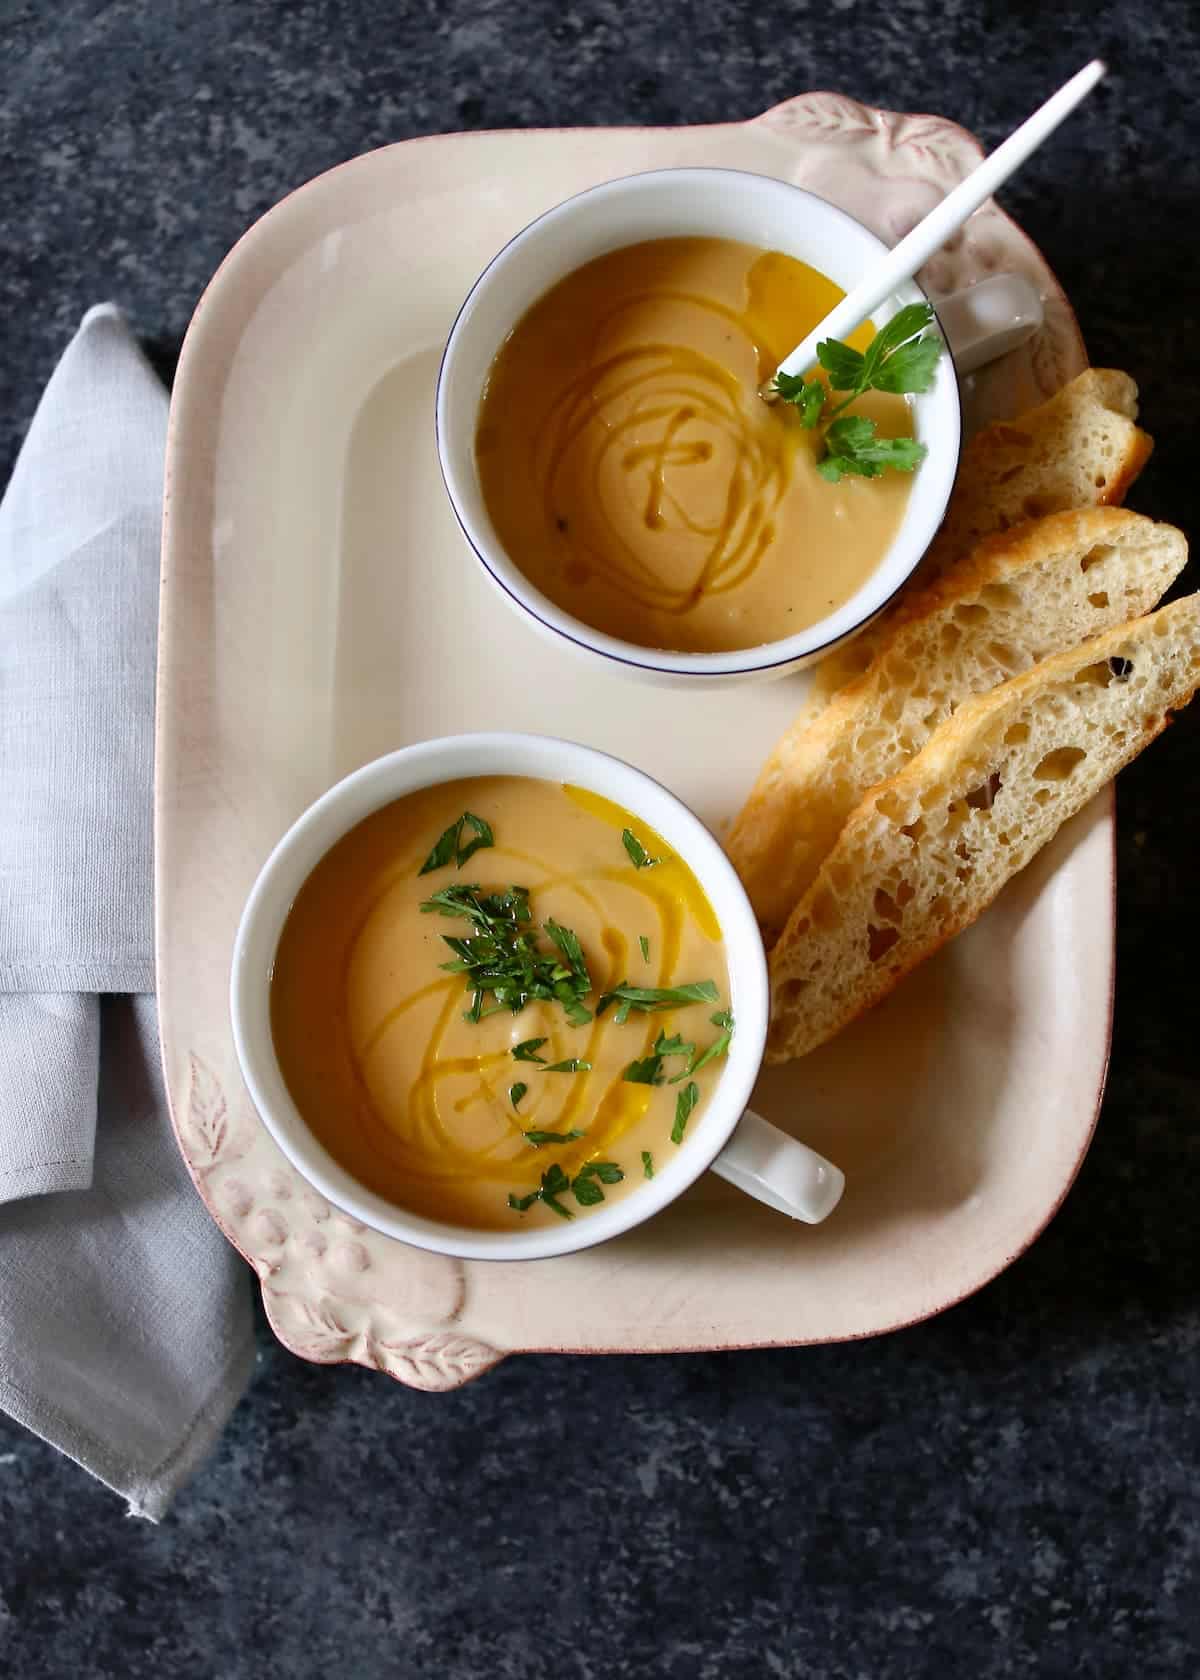 a tray with two cups of soup and bread on it.